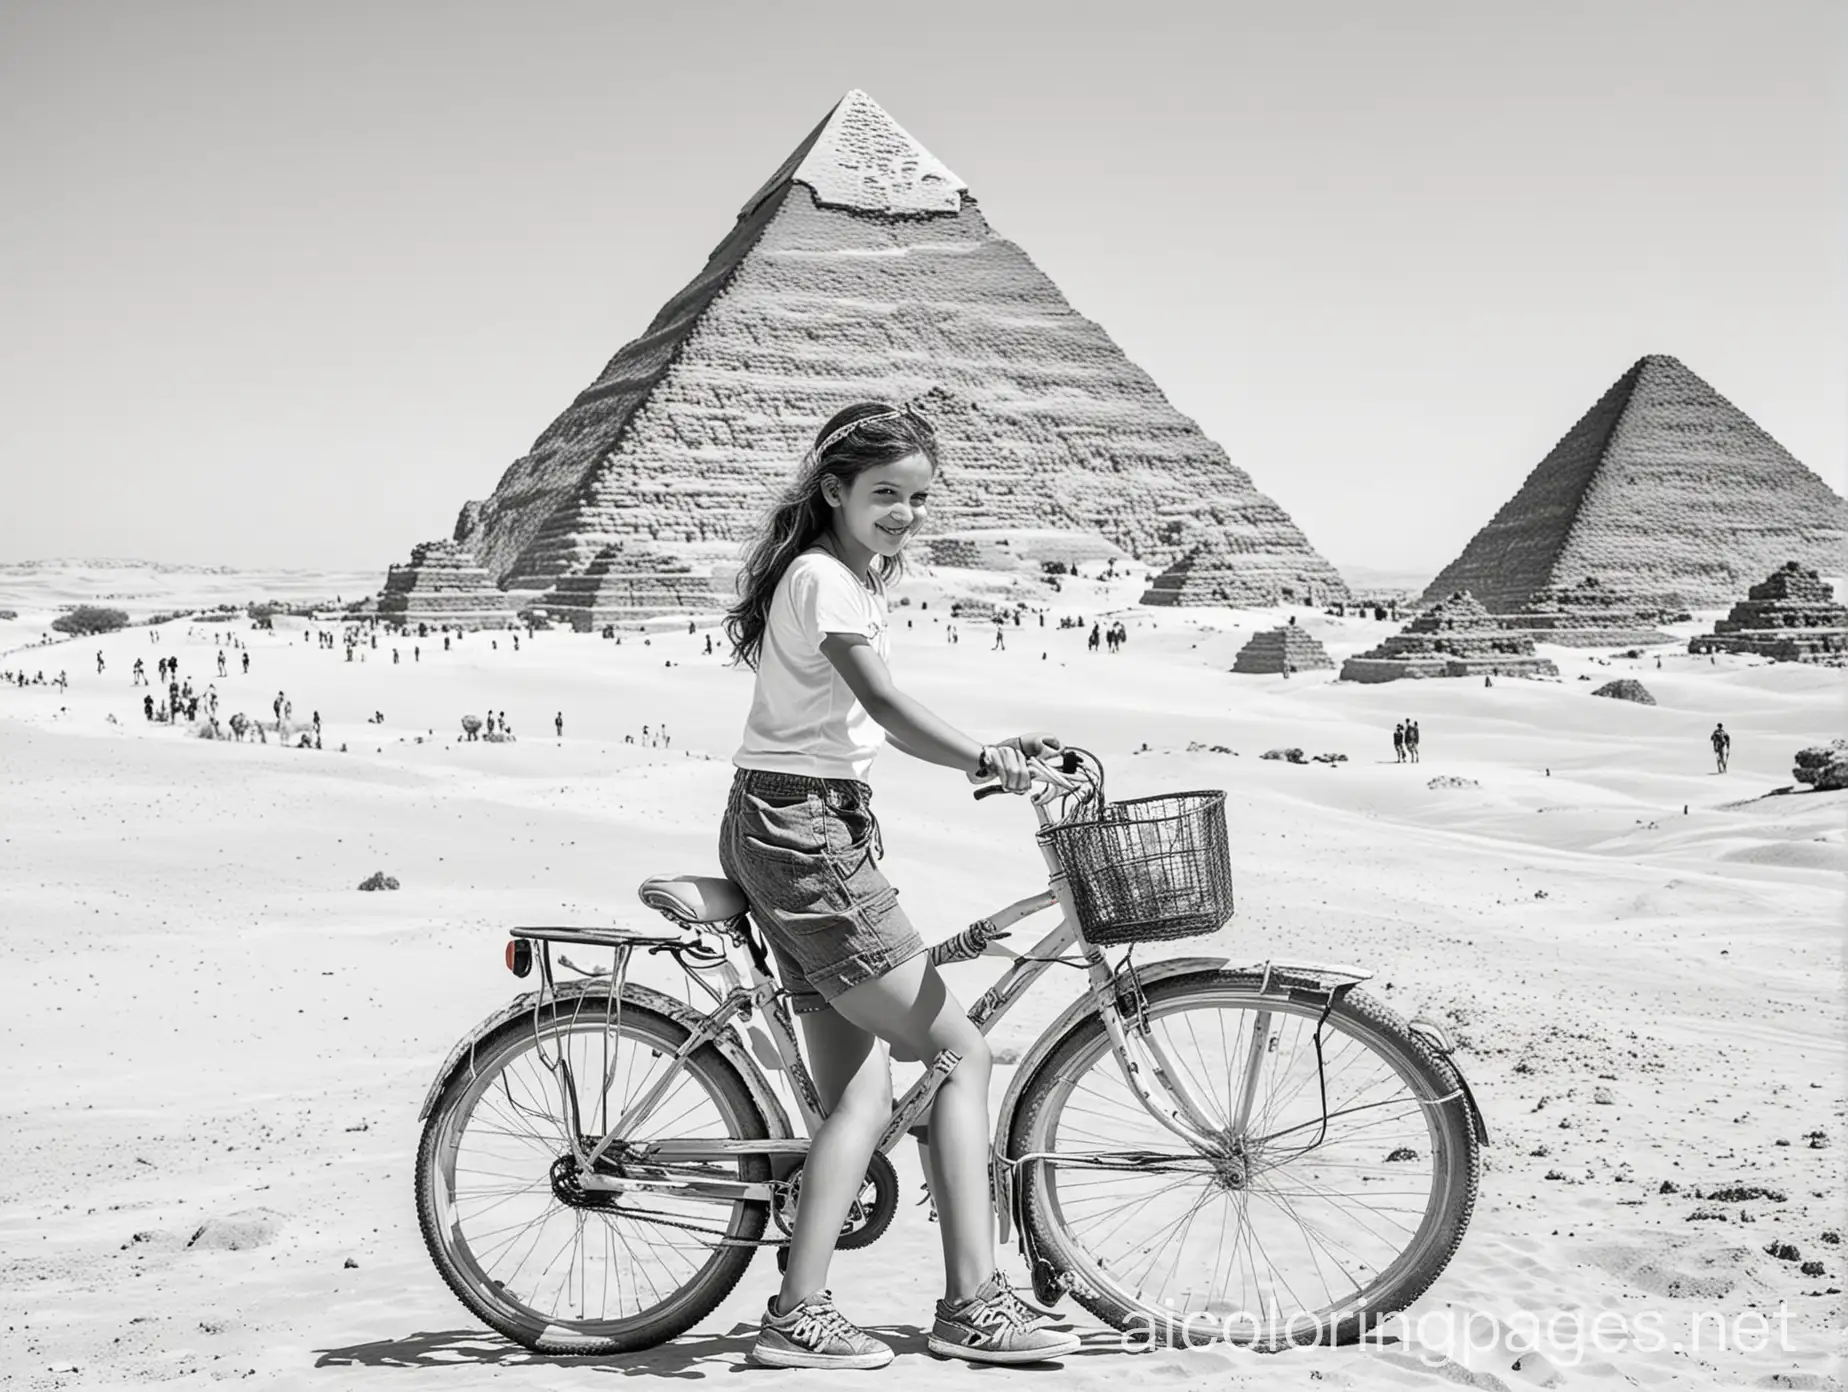 A girl in shorts and a T-shirt rides a bicycle on a sandy road, Egyptian pyramids can be seen in the distance, the girl has a digital camera on a strap around her neck, Coloring Page, black and white, line art, white background, Simplicity, Ample White Space. The background of the coloring page is plain white to make it easy for young children to color within the lines. The outlines of all the subjects are easy to distinguish, making it simple for kids to color without too much difficulty